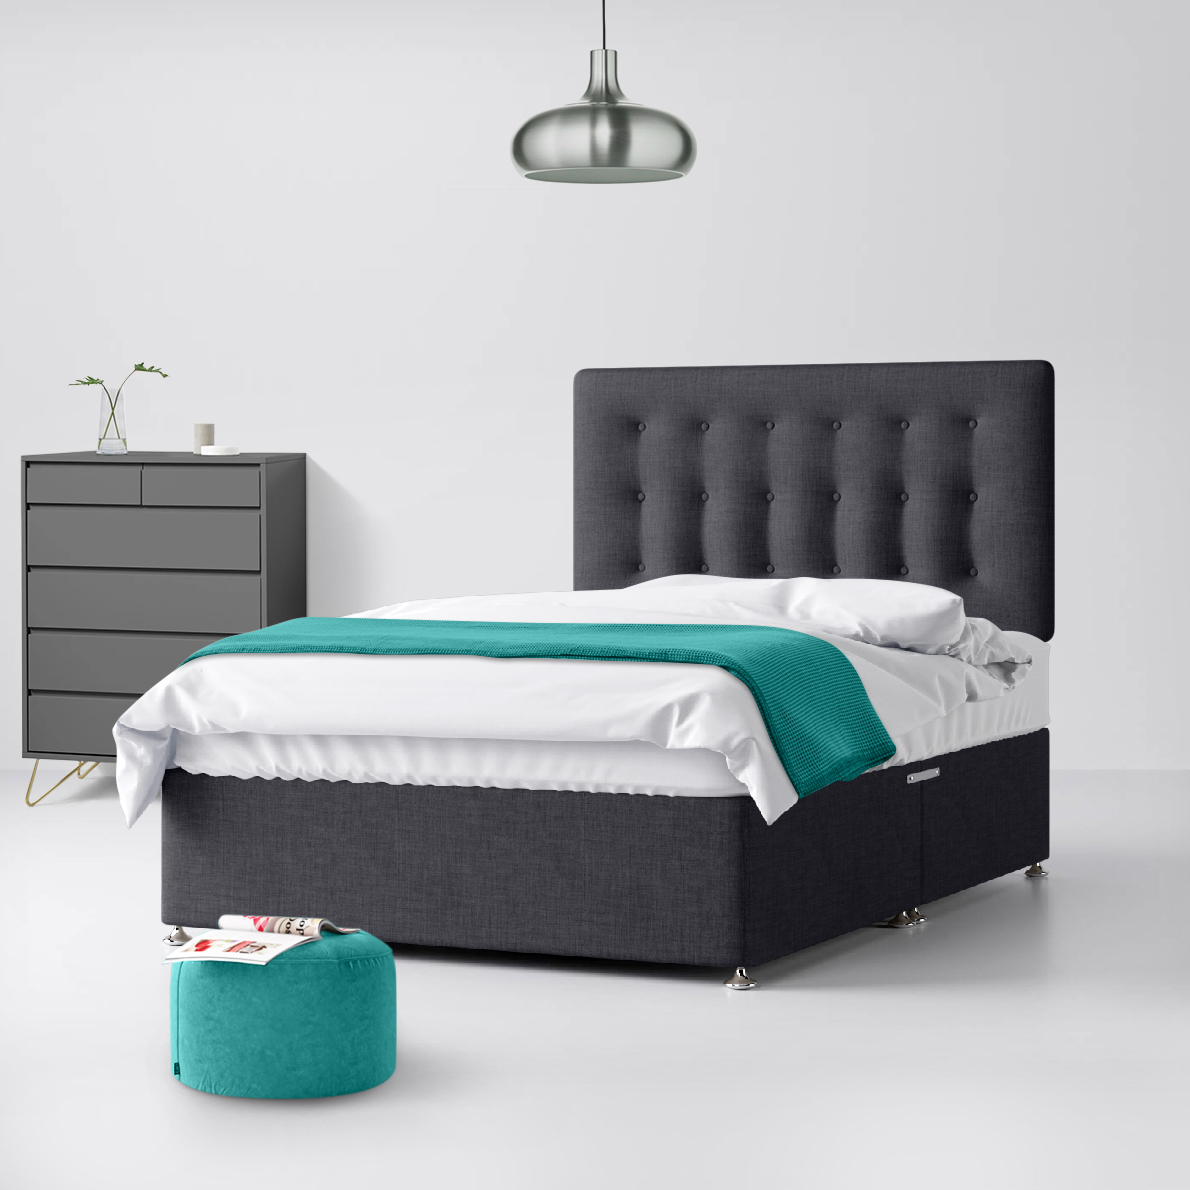 Single - Divan Bed and Cornell Buttoned Headboard - Dark Grey - Charcoal - Fabric - 3ft - Happy Beds